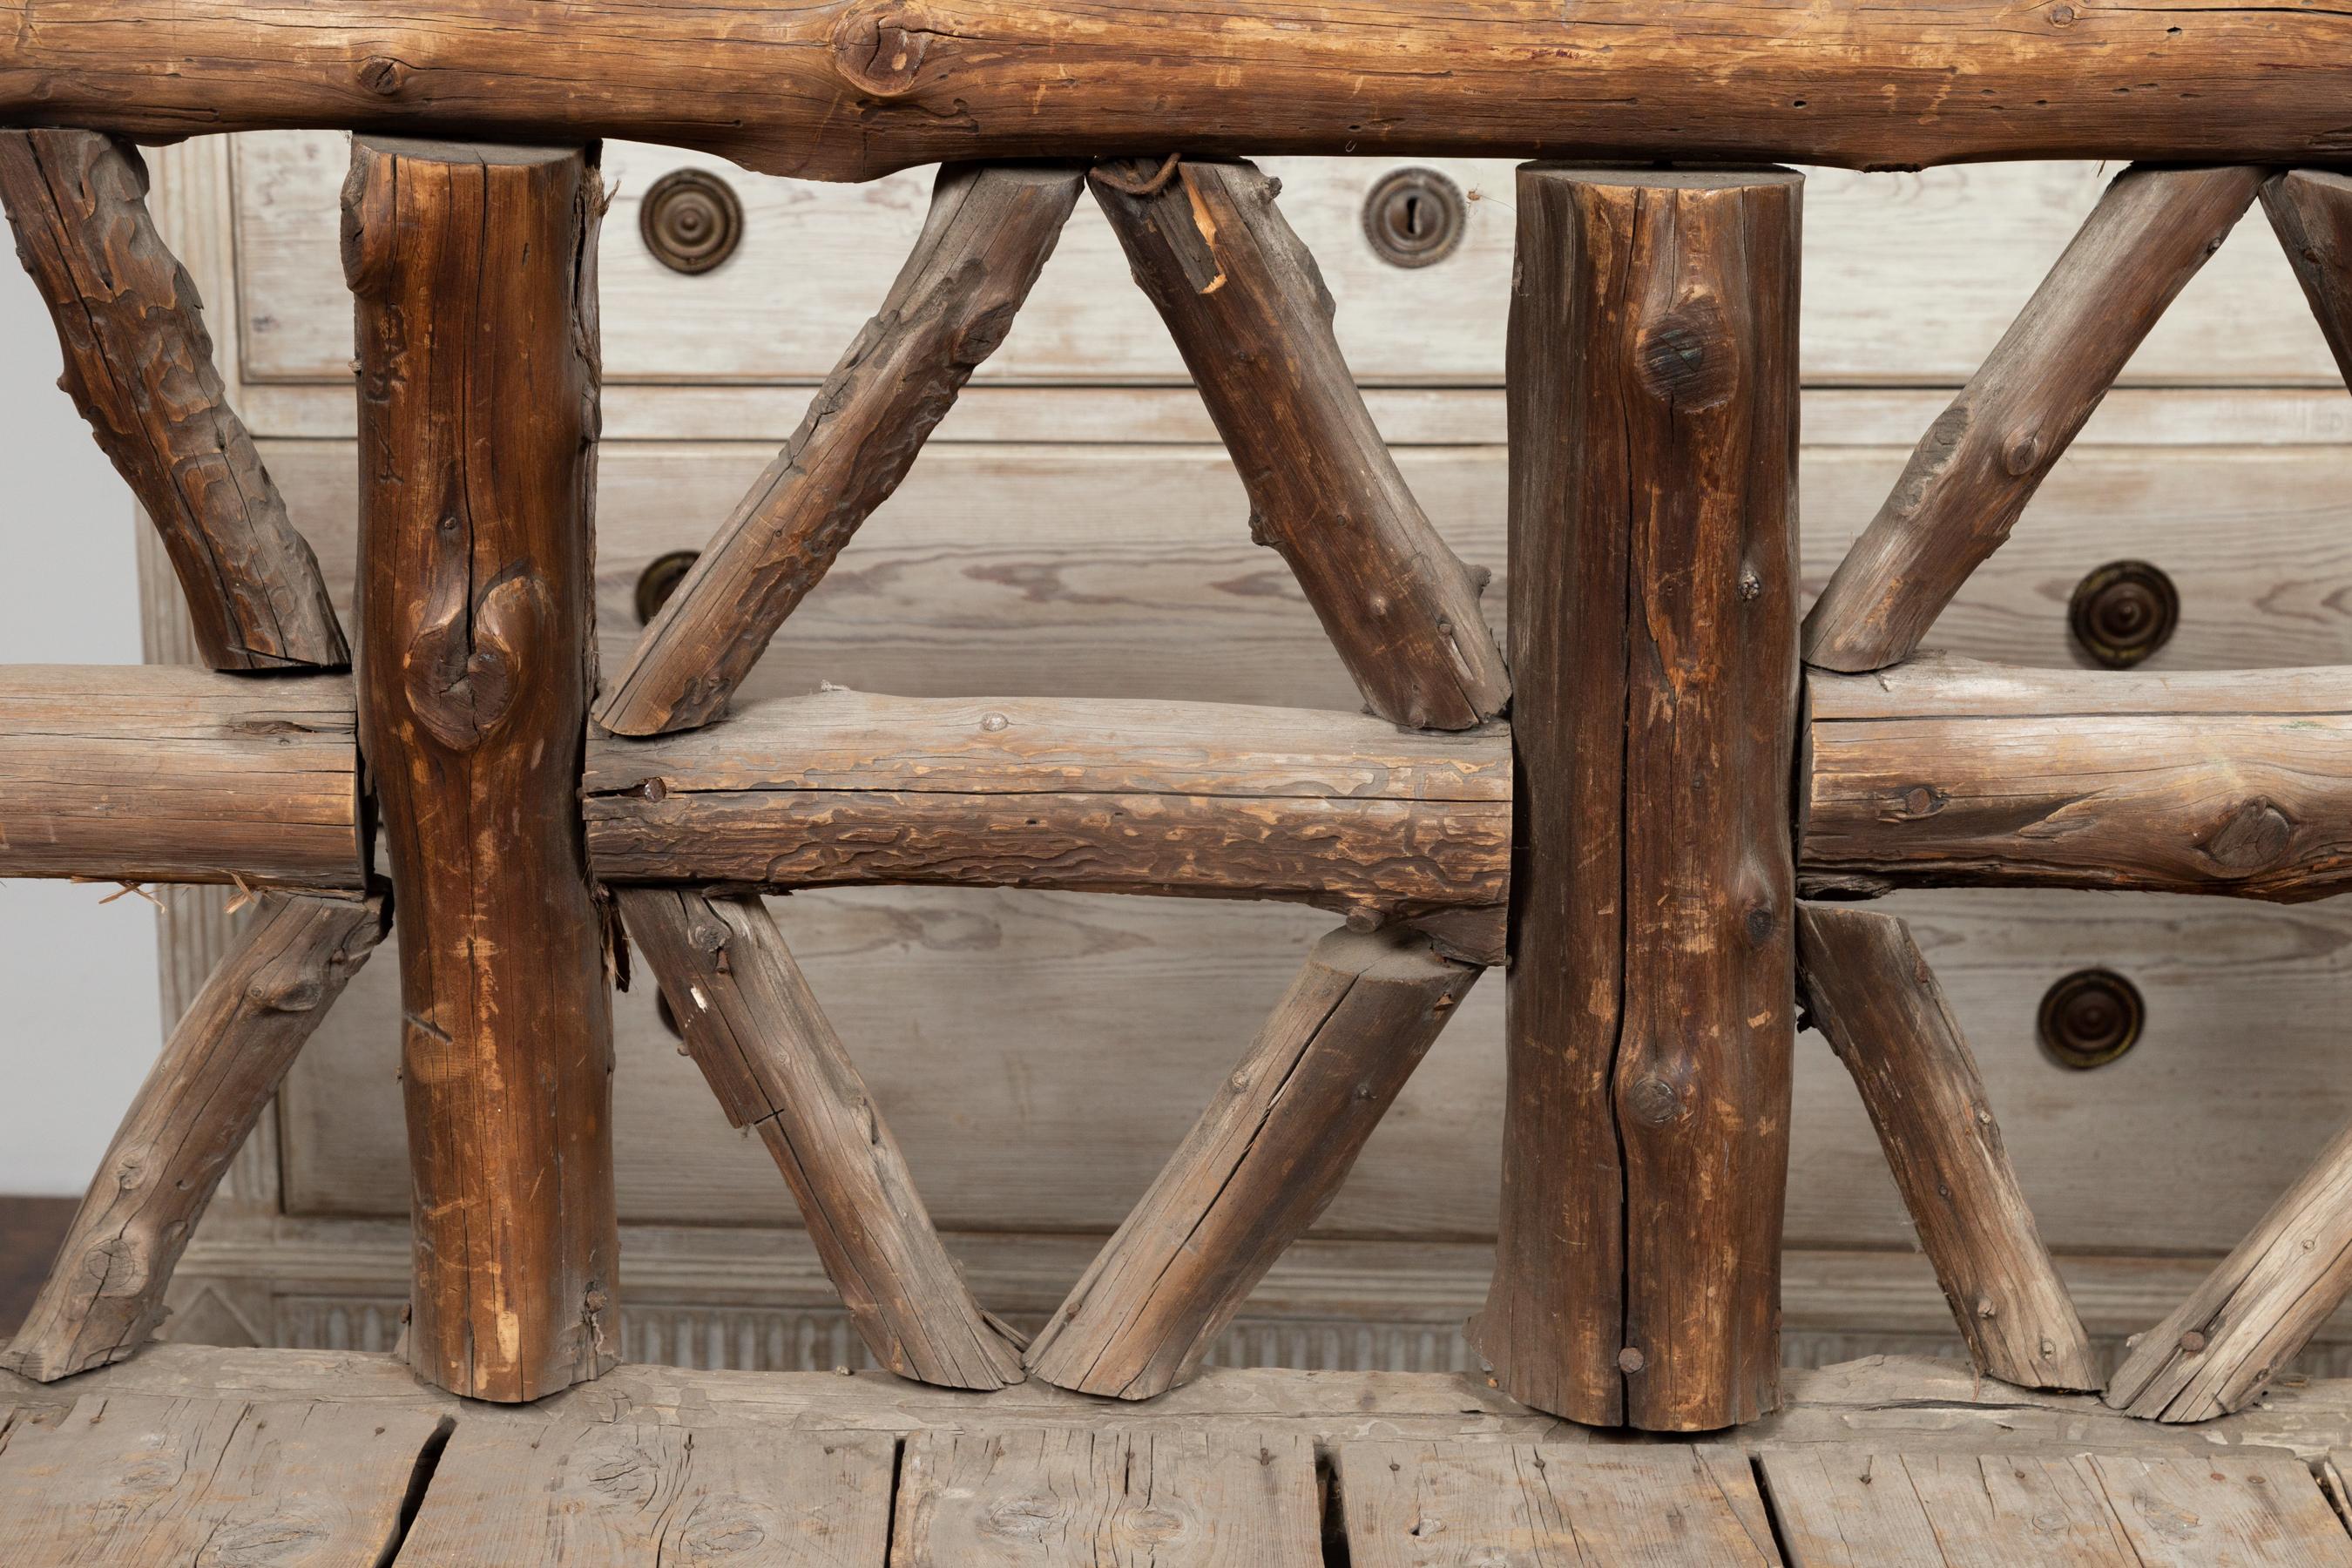 American 1930s Rustic Bench Made of Logs and Slatted Rectangular Seat 2